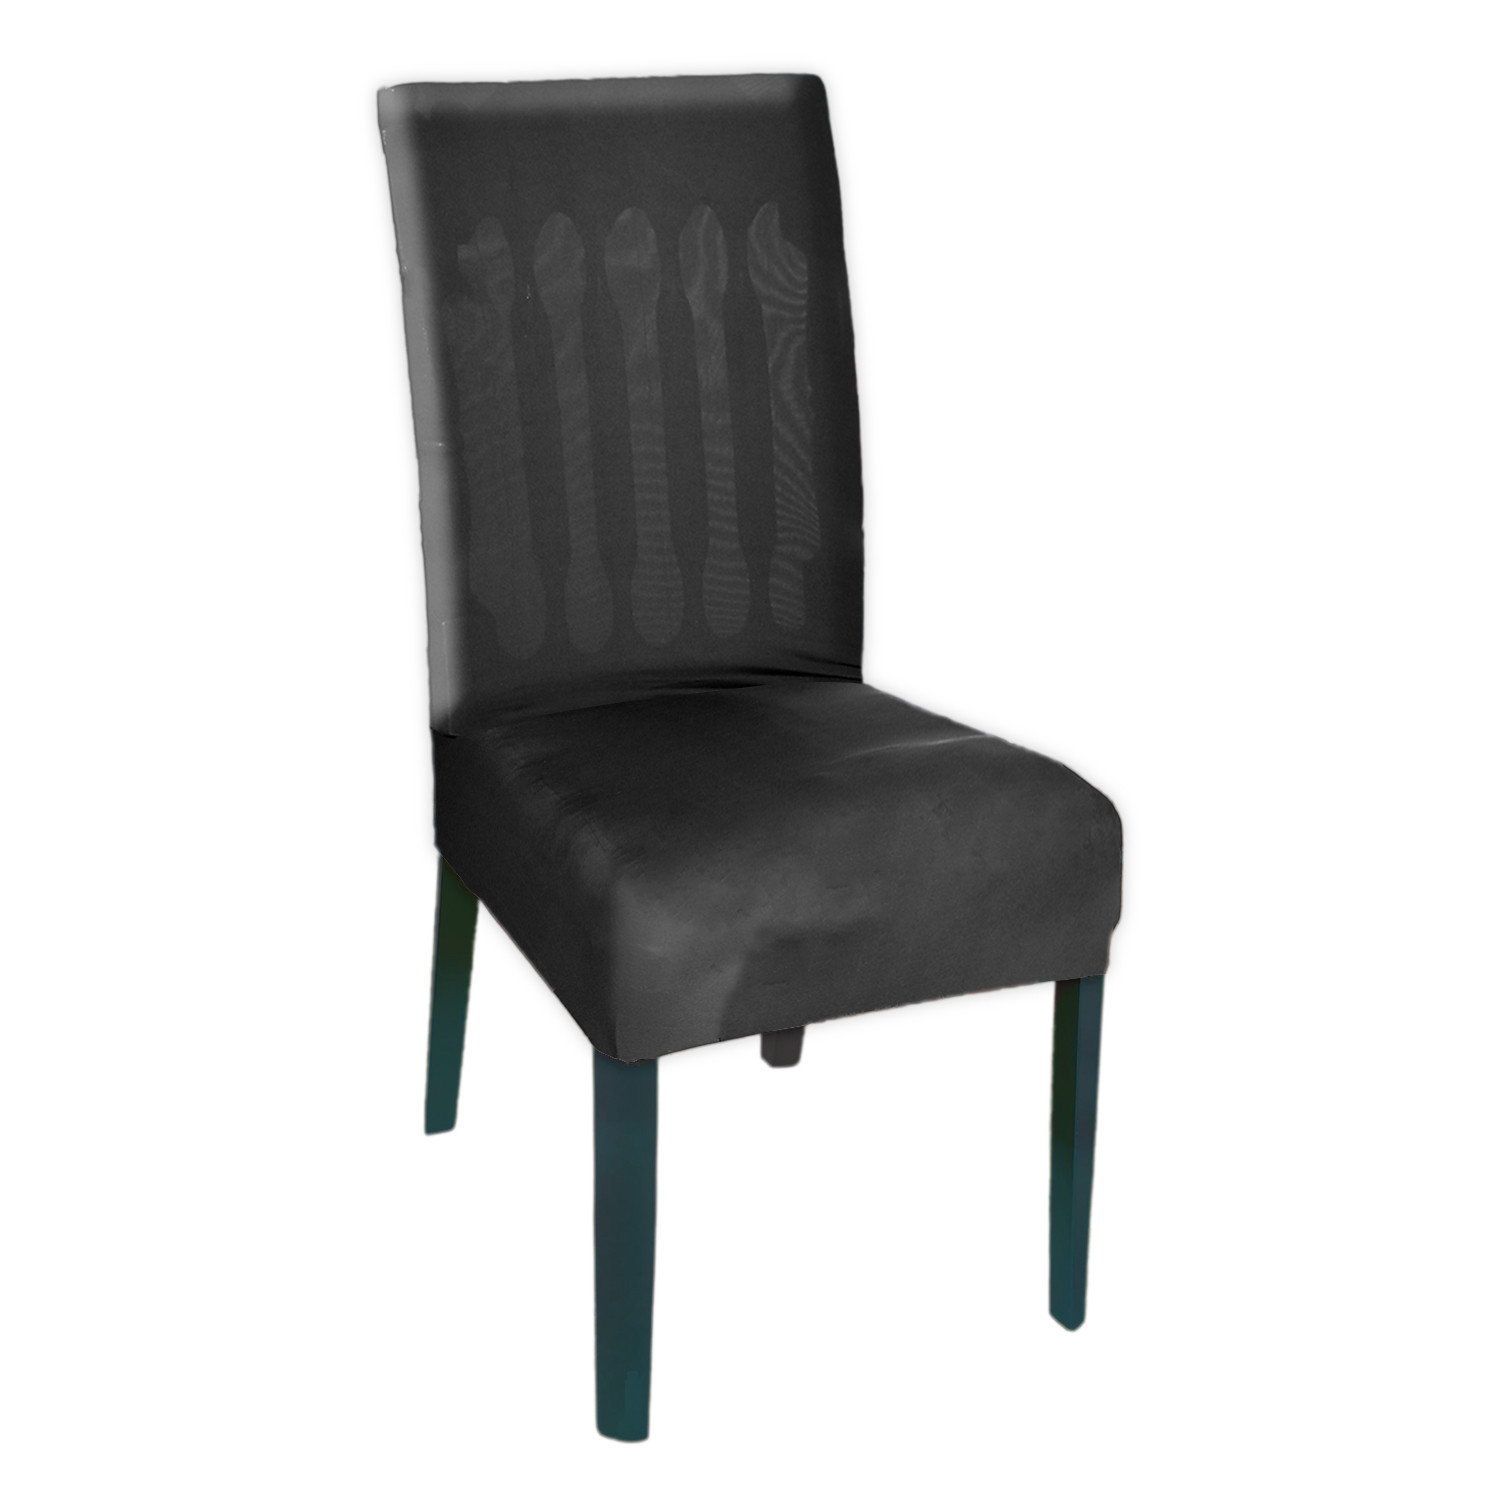 Kuber Industries Elastic Stretchable Polyster Chair Cover For Home, Office, Hotels, Wedding Banquet (Black)